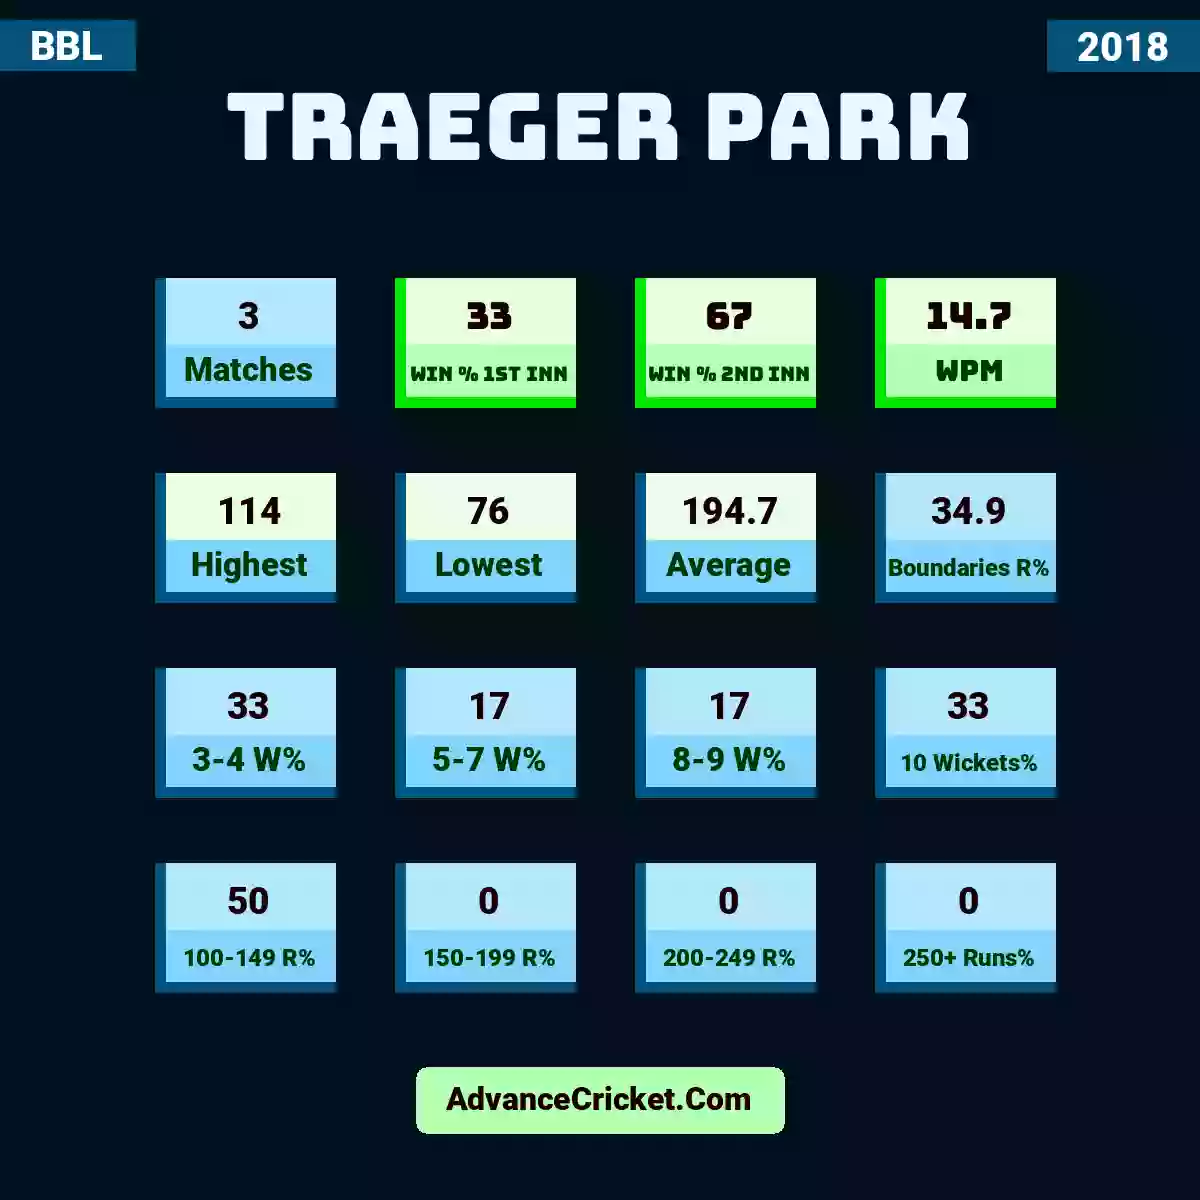 Image showing Traeger Park with Matches: 3, Win % 1st Inn: 33, Win % 2nd Inn: 67, WPM: 14.7, Highest: 114, Lowest: 76, Average: 194.7, Boundaries R%: 34.9, 3-4 W%: 33, 5-7 W%: 17, 8-9 W%: 17, 10 Wickets%: 33, 100-149 R%: 50, 150-199 R%: 0, 200-249 R%: 0, 250+ Runs%: 0.